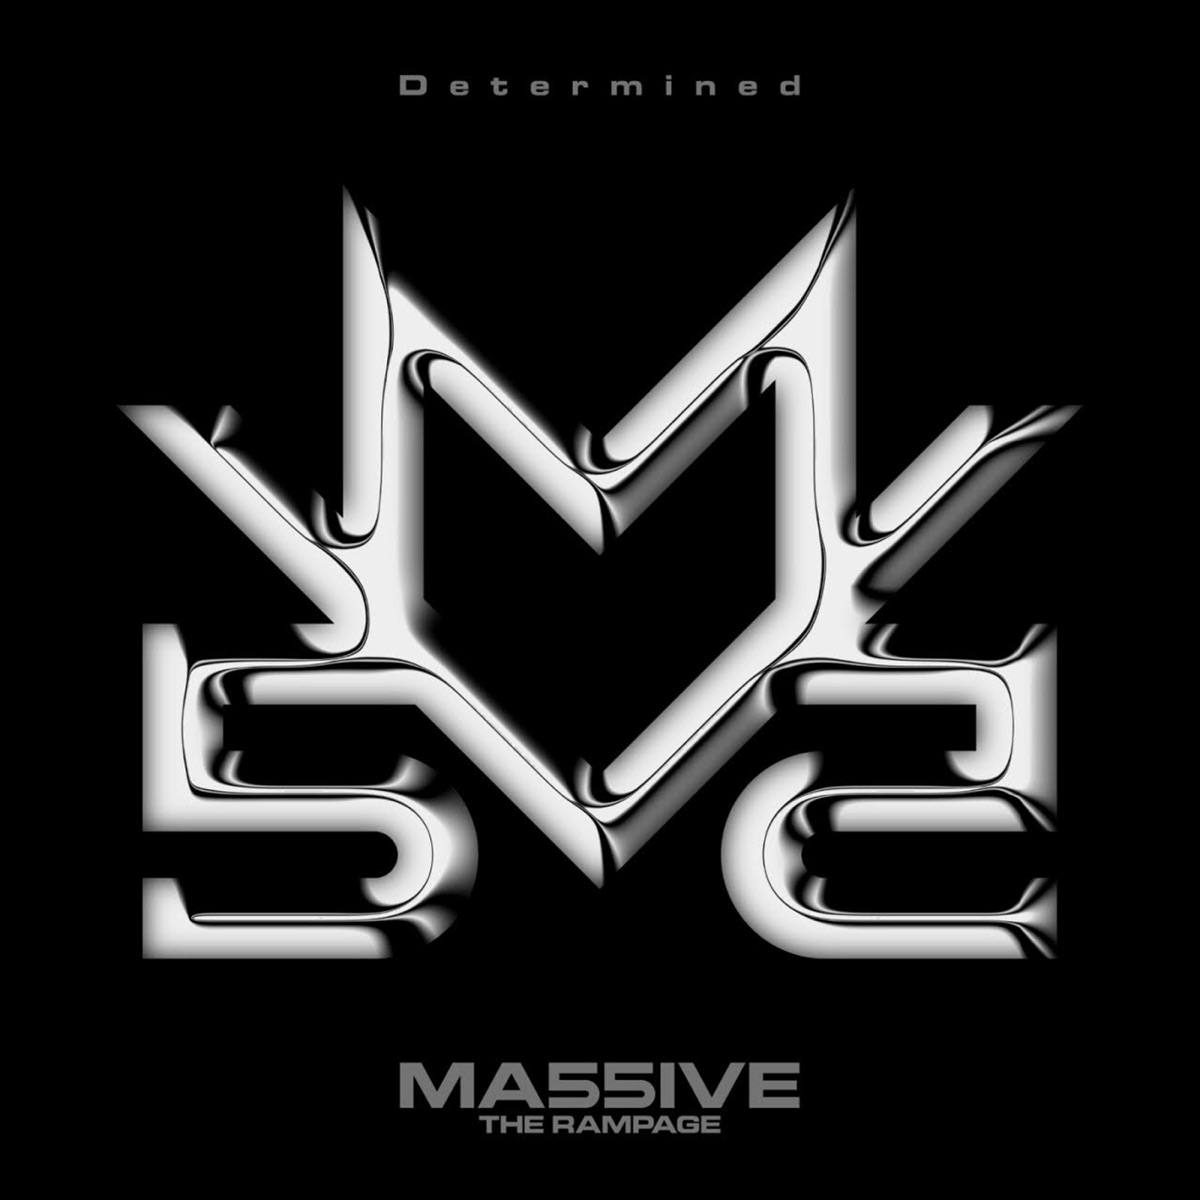 『MA55IVE THE RAMPAGE - Determined』収録の『Determined』ジャケット